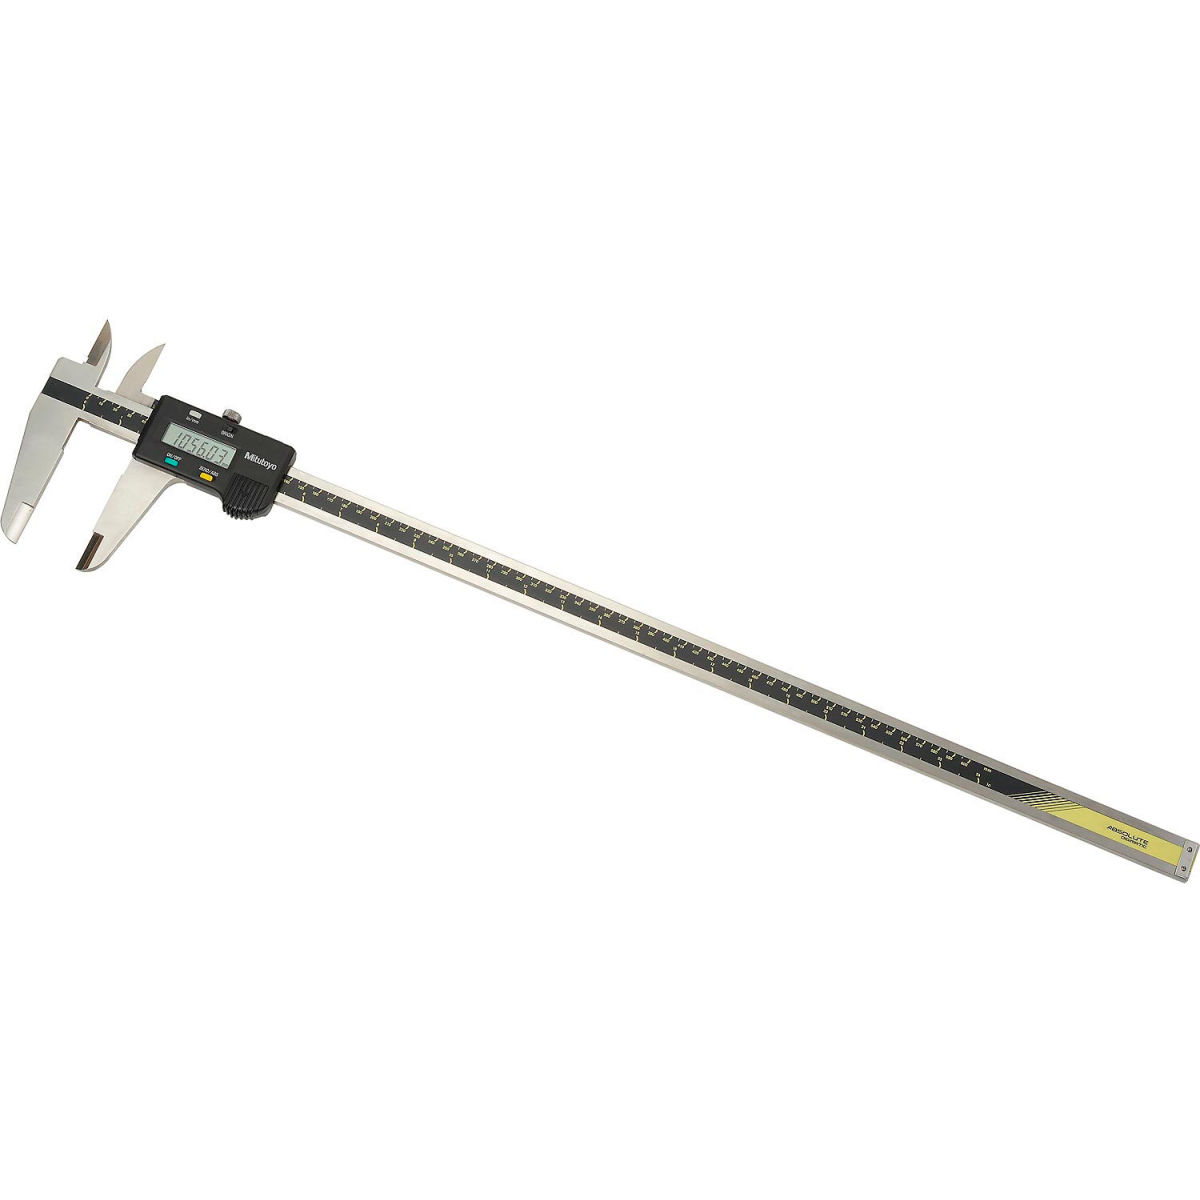 B611469 500-506-10 Digimatic 0-24 in. & 600 mm Stainless Steel Digital Caliper with Data Output -  Mitutoyo America